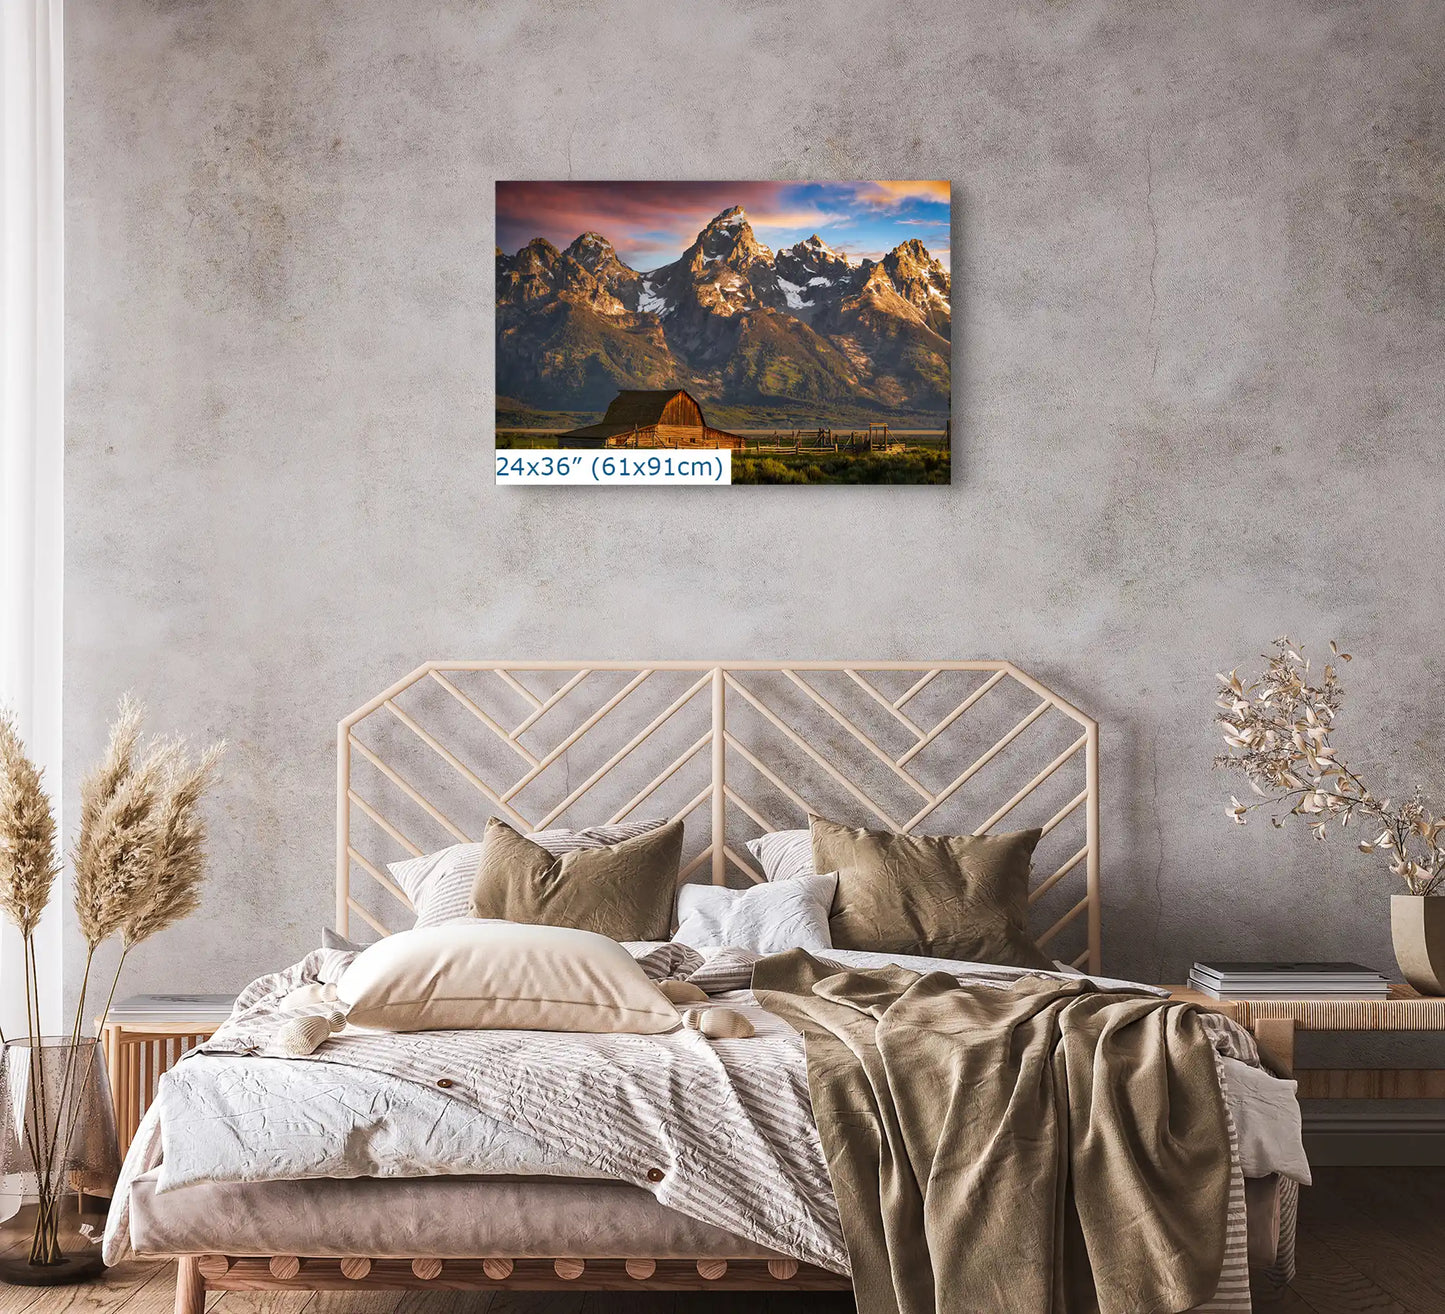 A 24x36 canvas print above a bed, capturing the sunrise over the John Moulton Homestead with the Teton Mountains, adding a peaceful touch to the bedroom decor.